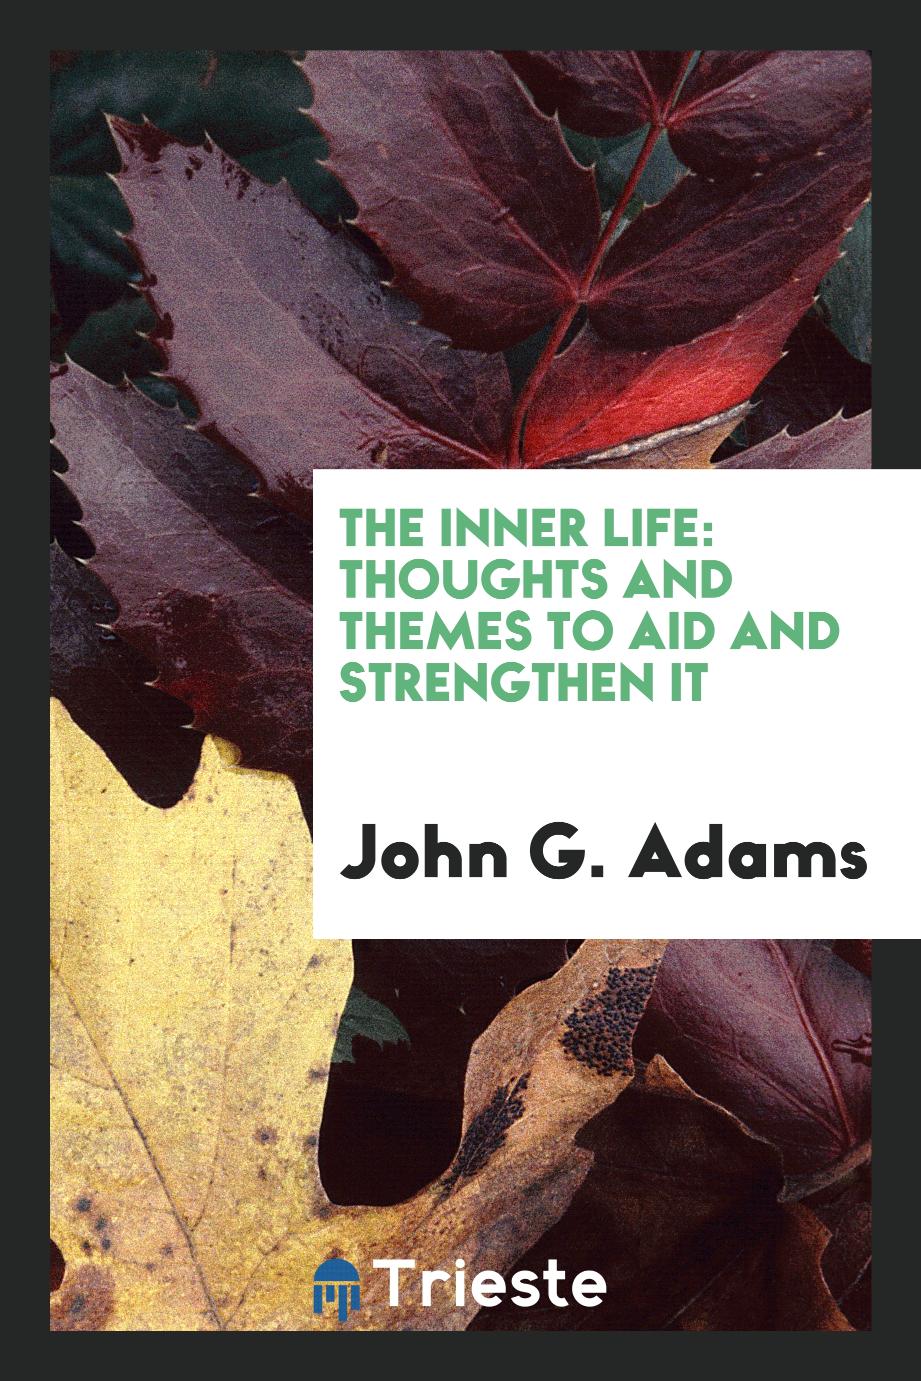 The Inner Life: Thoughts and Themes to Aid and Strengthen It